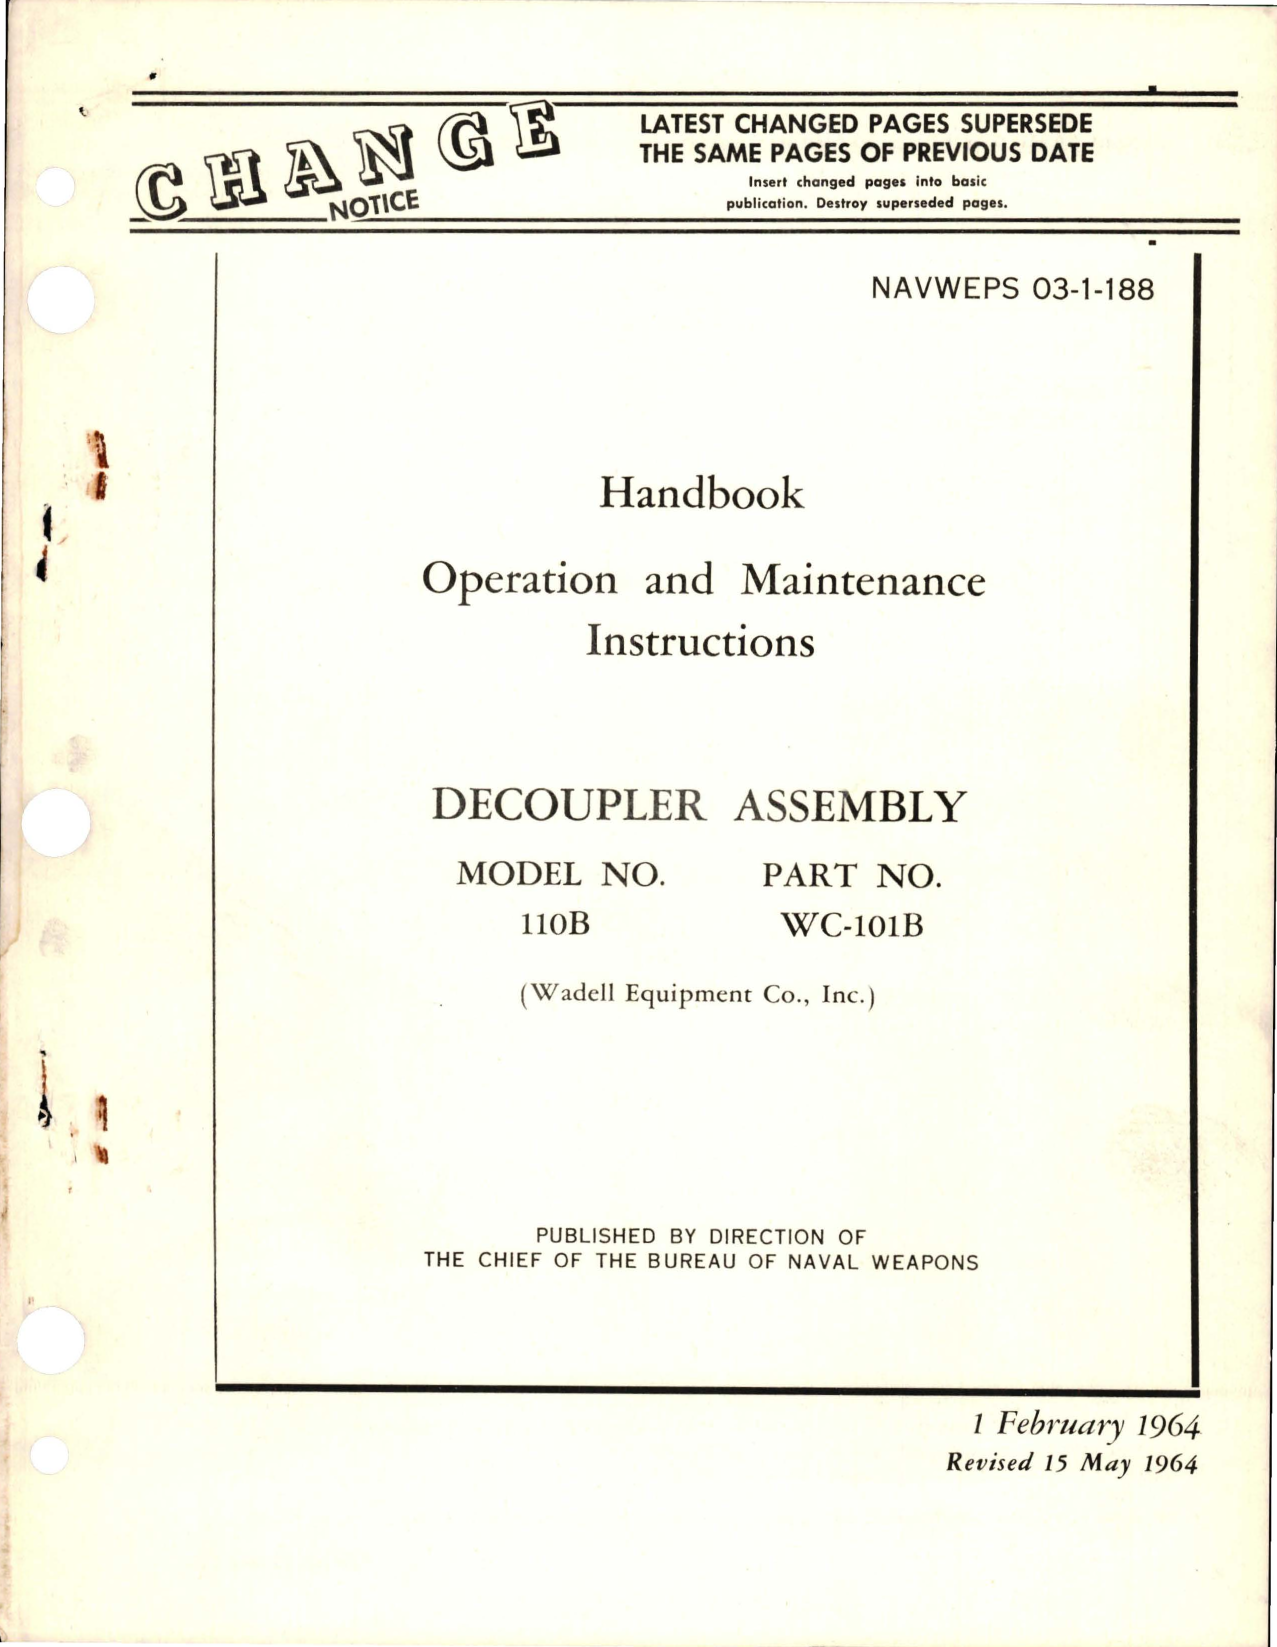 Sample page 1 from AirCorps Library document: Operation and Maintenance Instructions for Decoupler Assembly - Model 110B - Part WC-101B